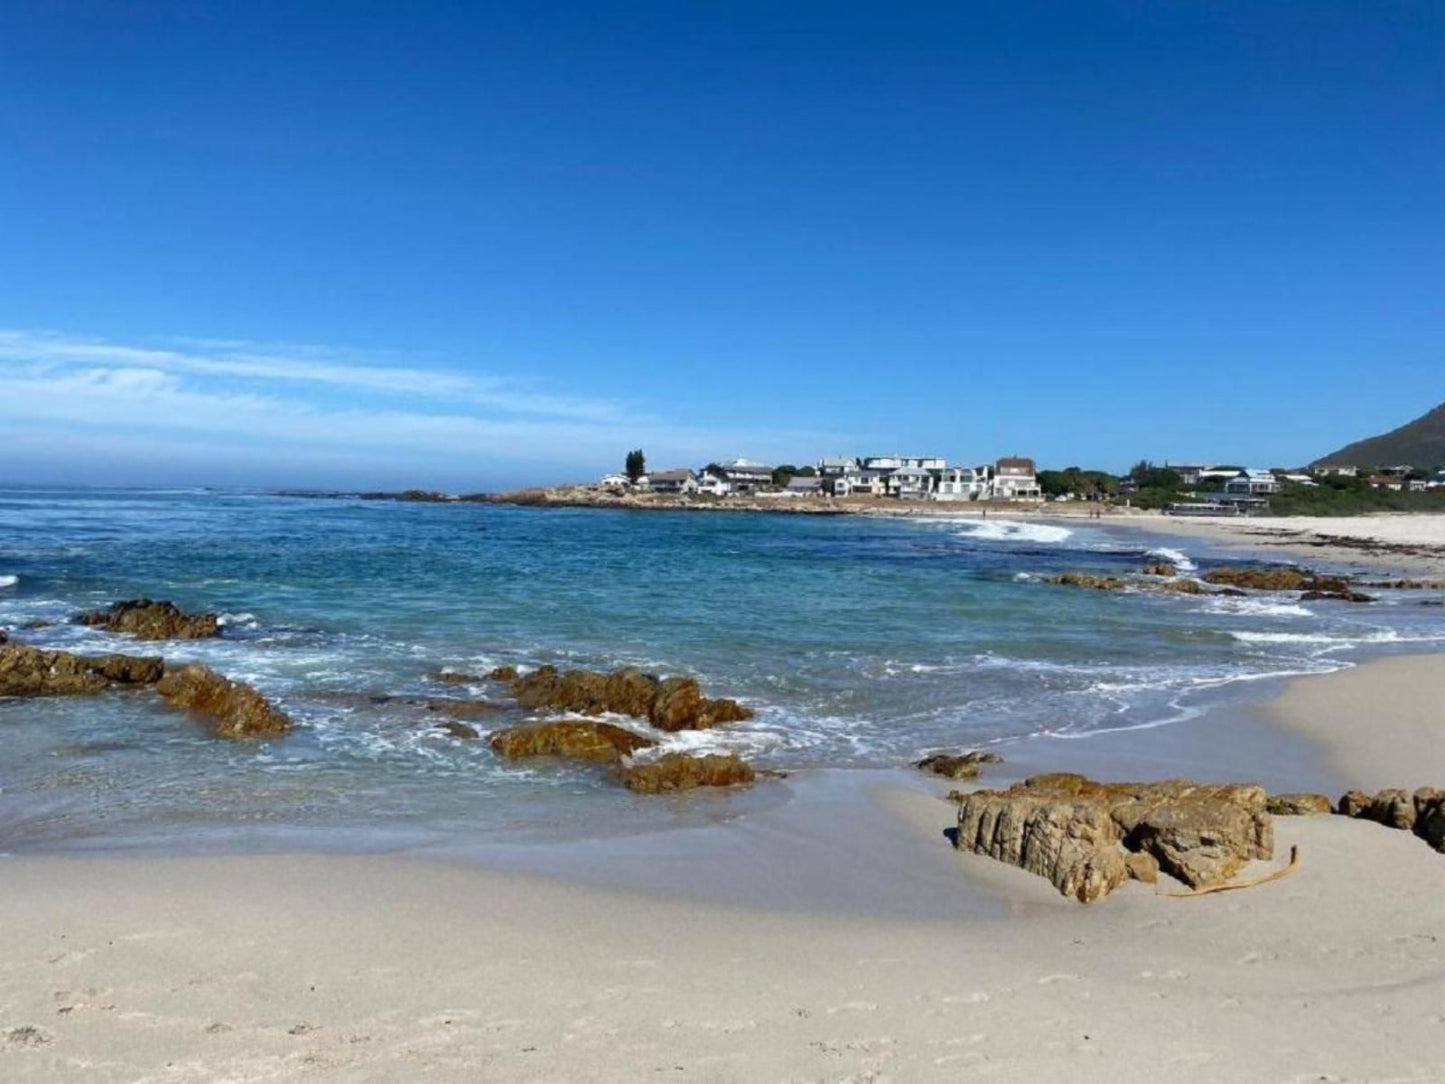 Shores Edge Cottage And Seapearl Ocean Front Villa Onrus Hermanus Western Cape South Africa Beach, Nature, Sand, Ocean, Waters